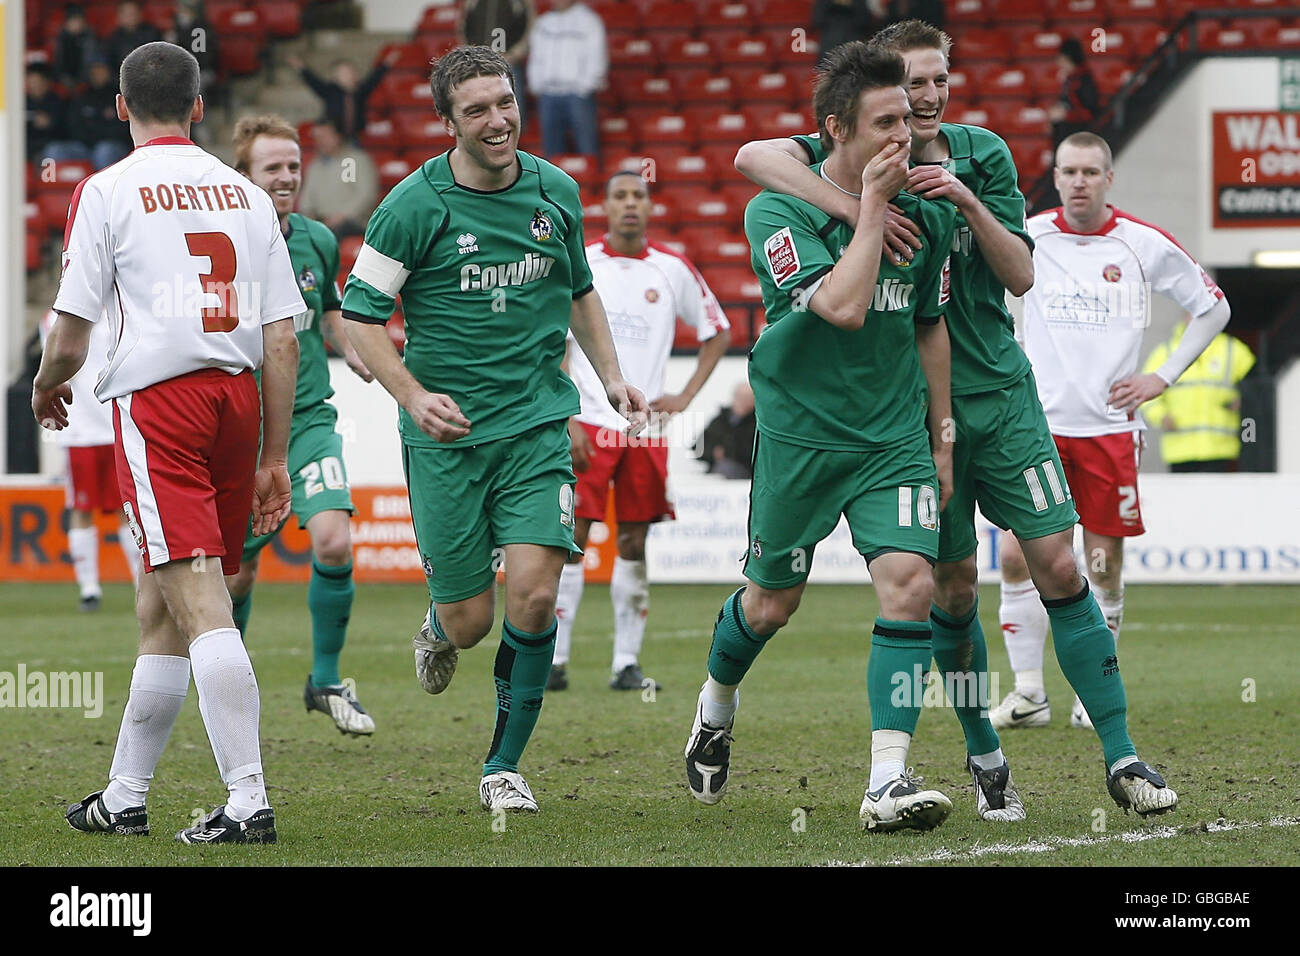 Bristol's Darryl Duffy (no.10) celebrates his goal during the Coca-Cola League One match at Banks Stadium, Walsall. Stock Photo